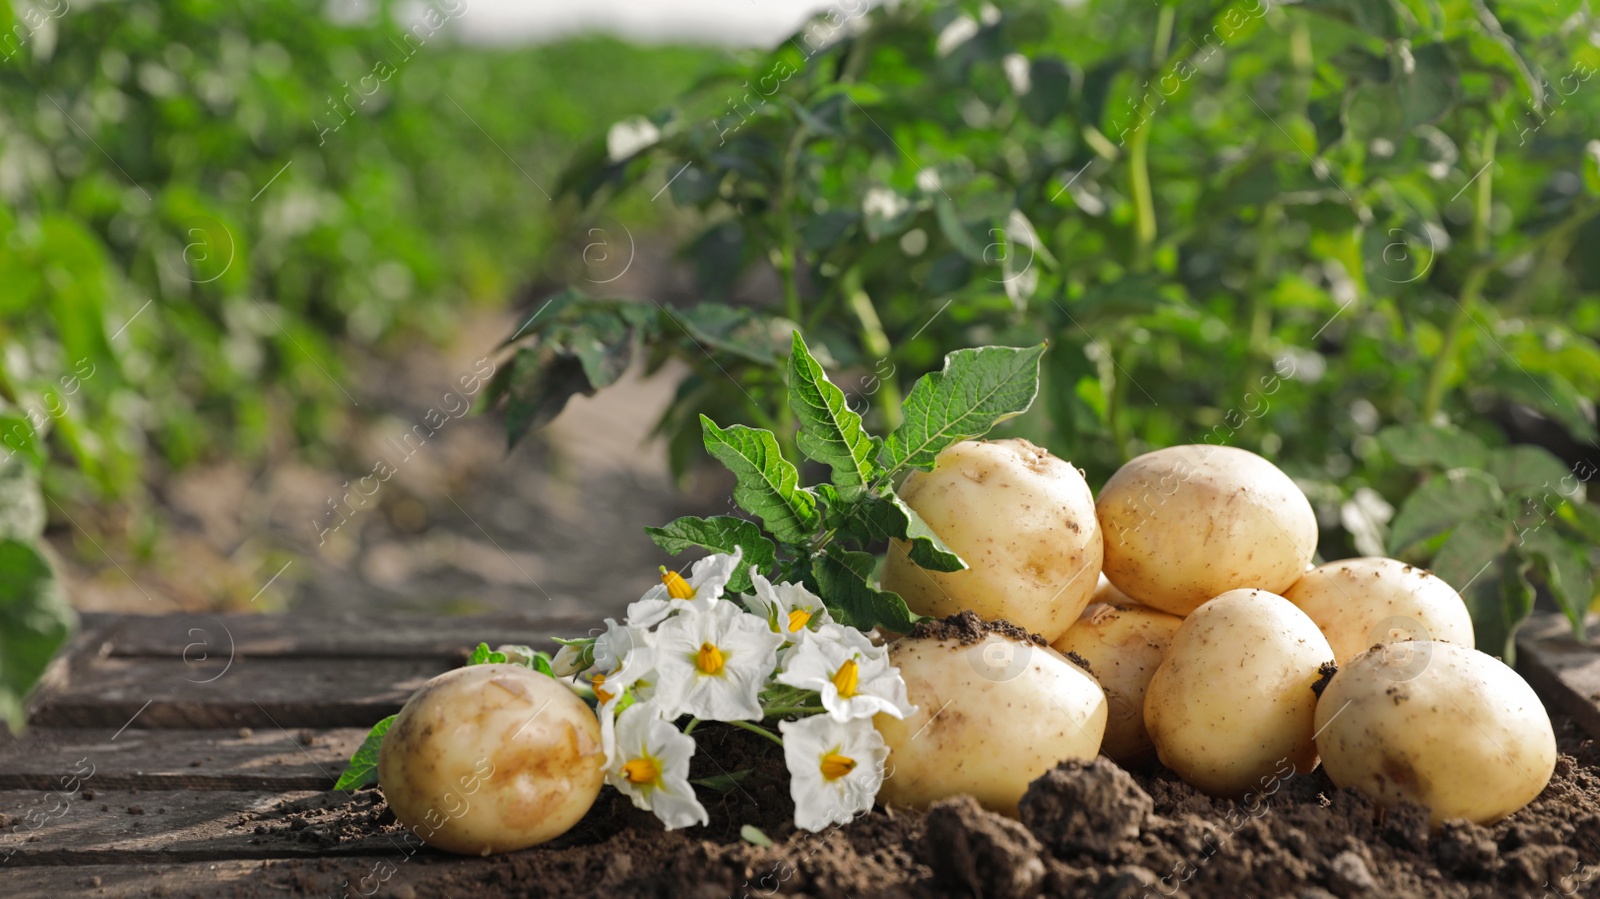 Photo of Pile of ripe potatoes on ground in field